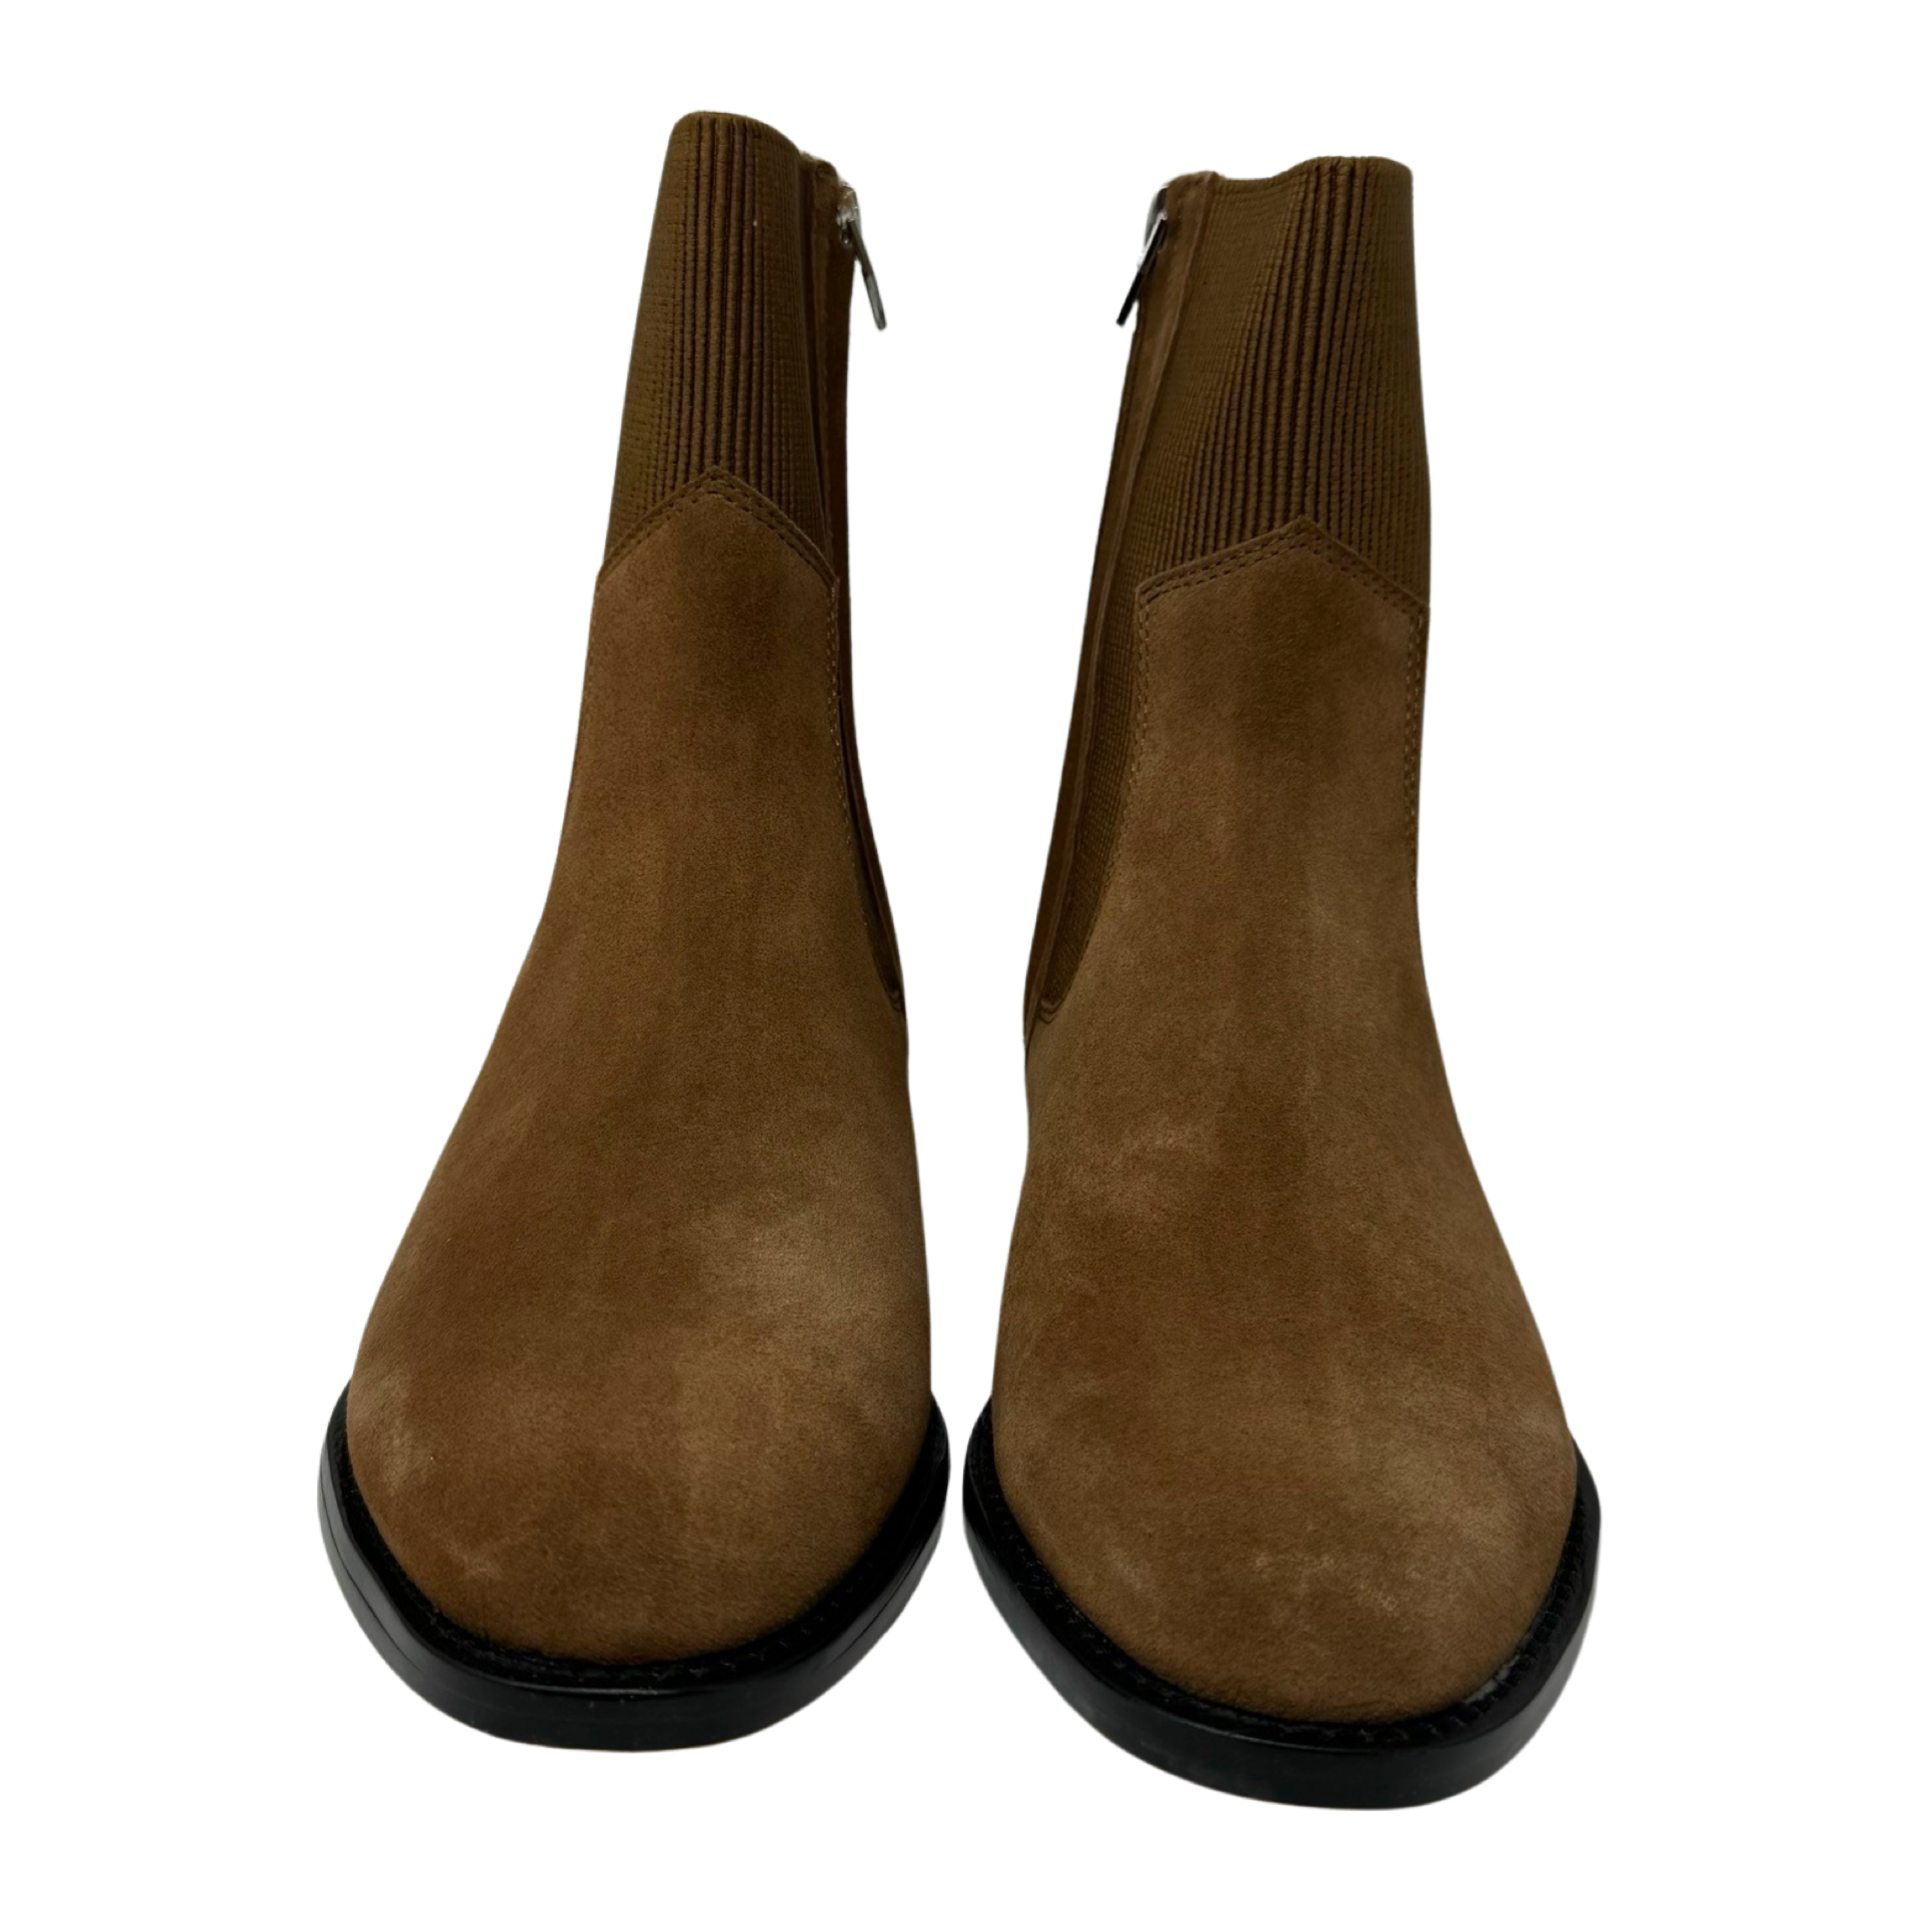 Dolce Vita Linny H20 Waterproof Suede Boots